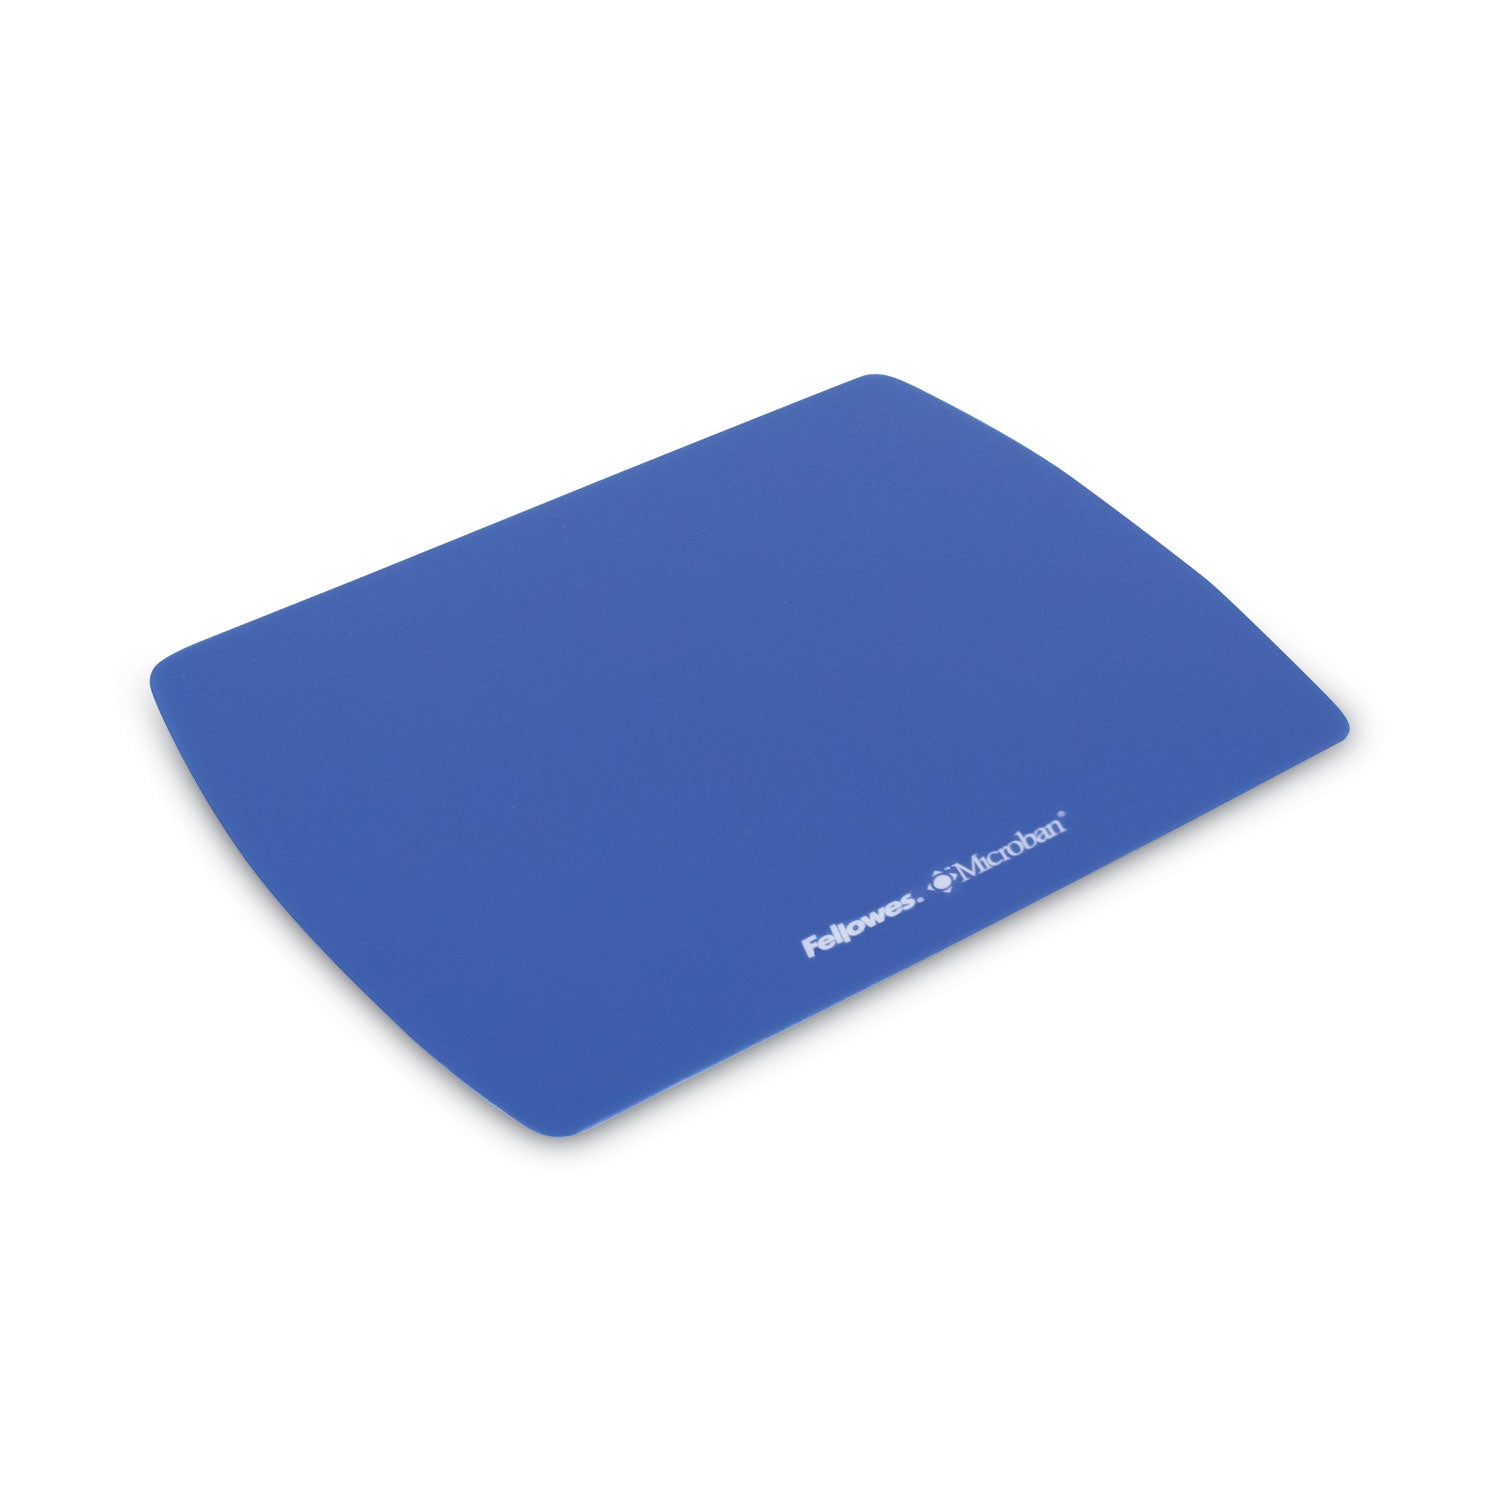 Ultra Thin Mouse Pad with Microban Protection, 9 x 7, Sapphire Blue - 